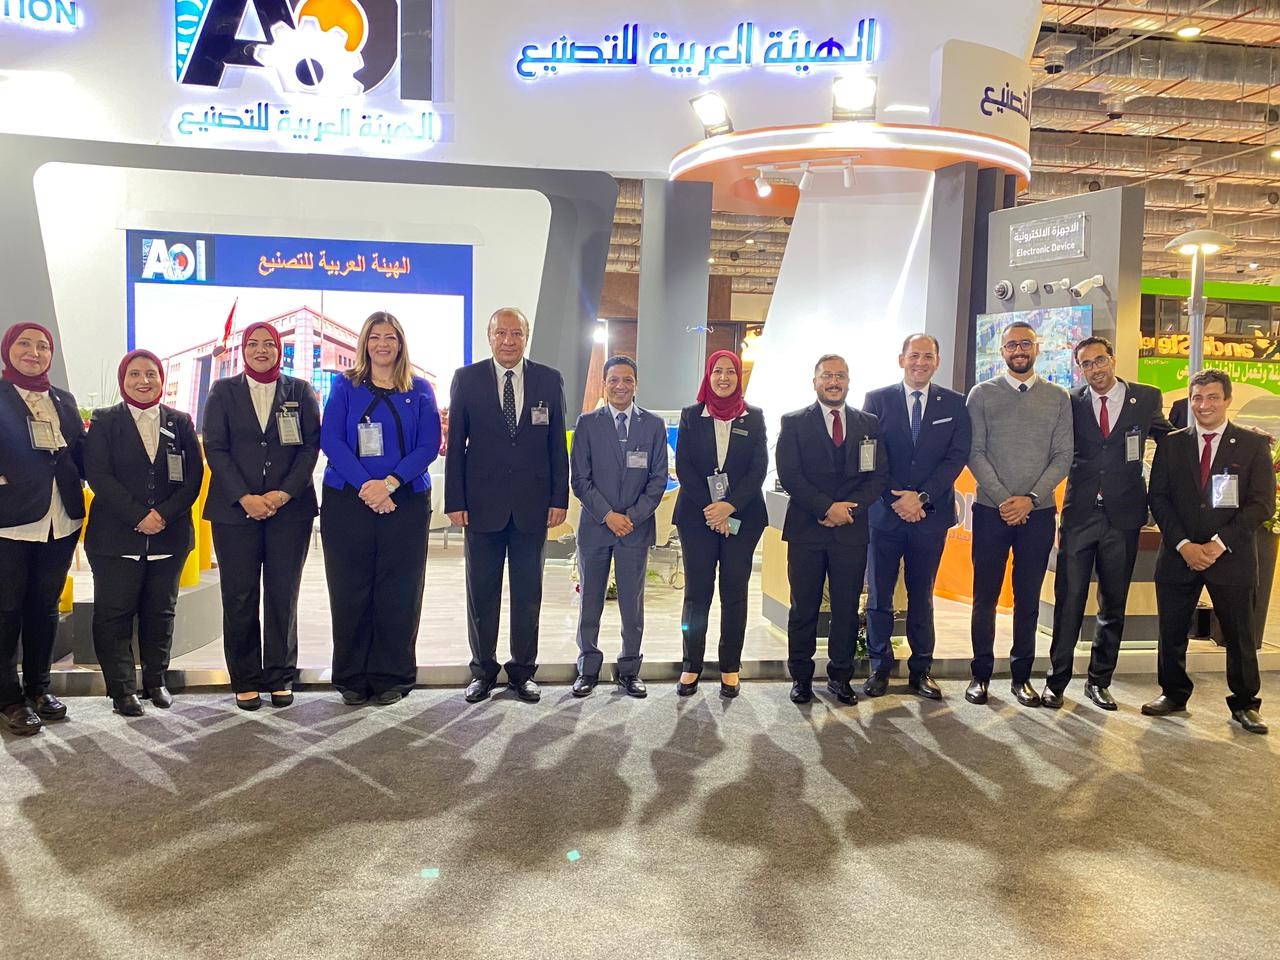 Distinguished participation of the Arab Organization for Industrialization in the opening of the Forum and the first international exhibition for industry